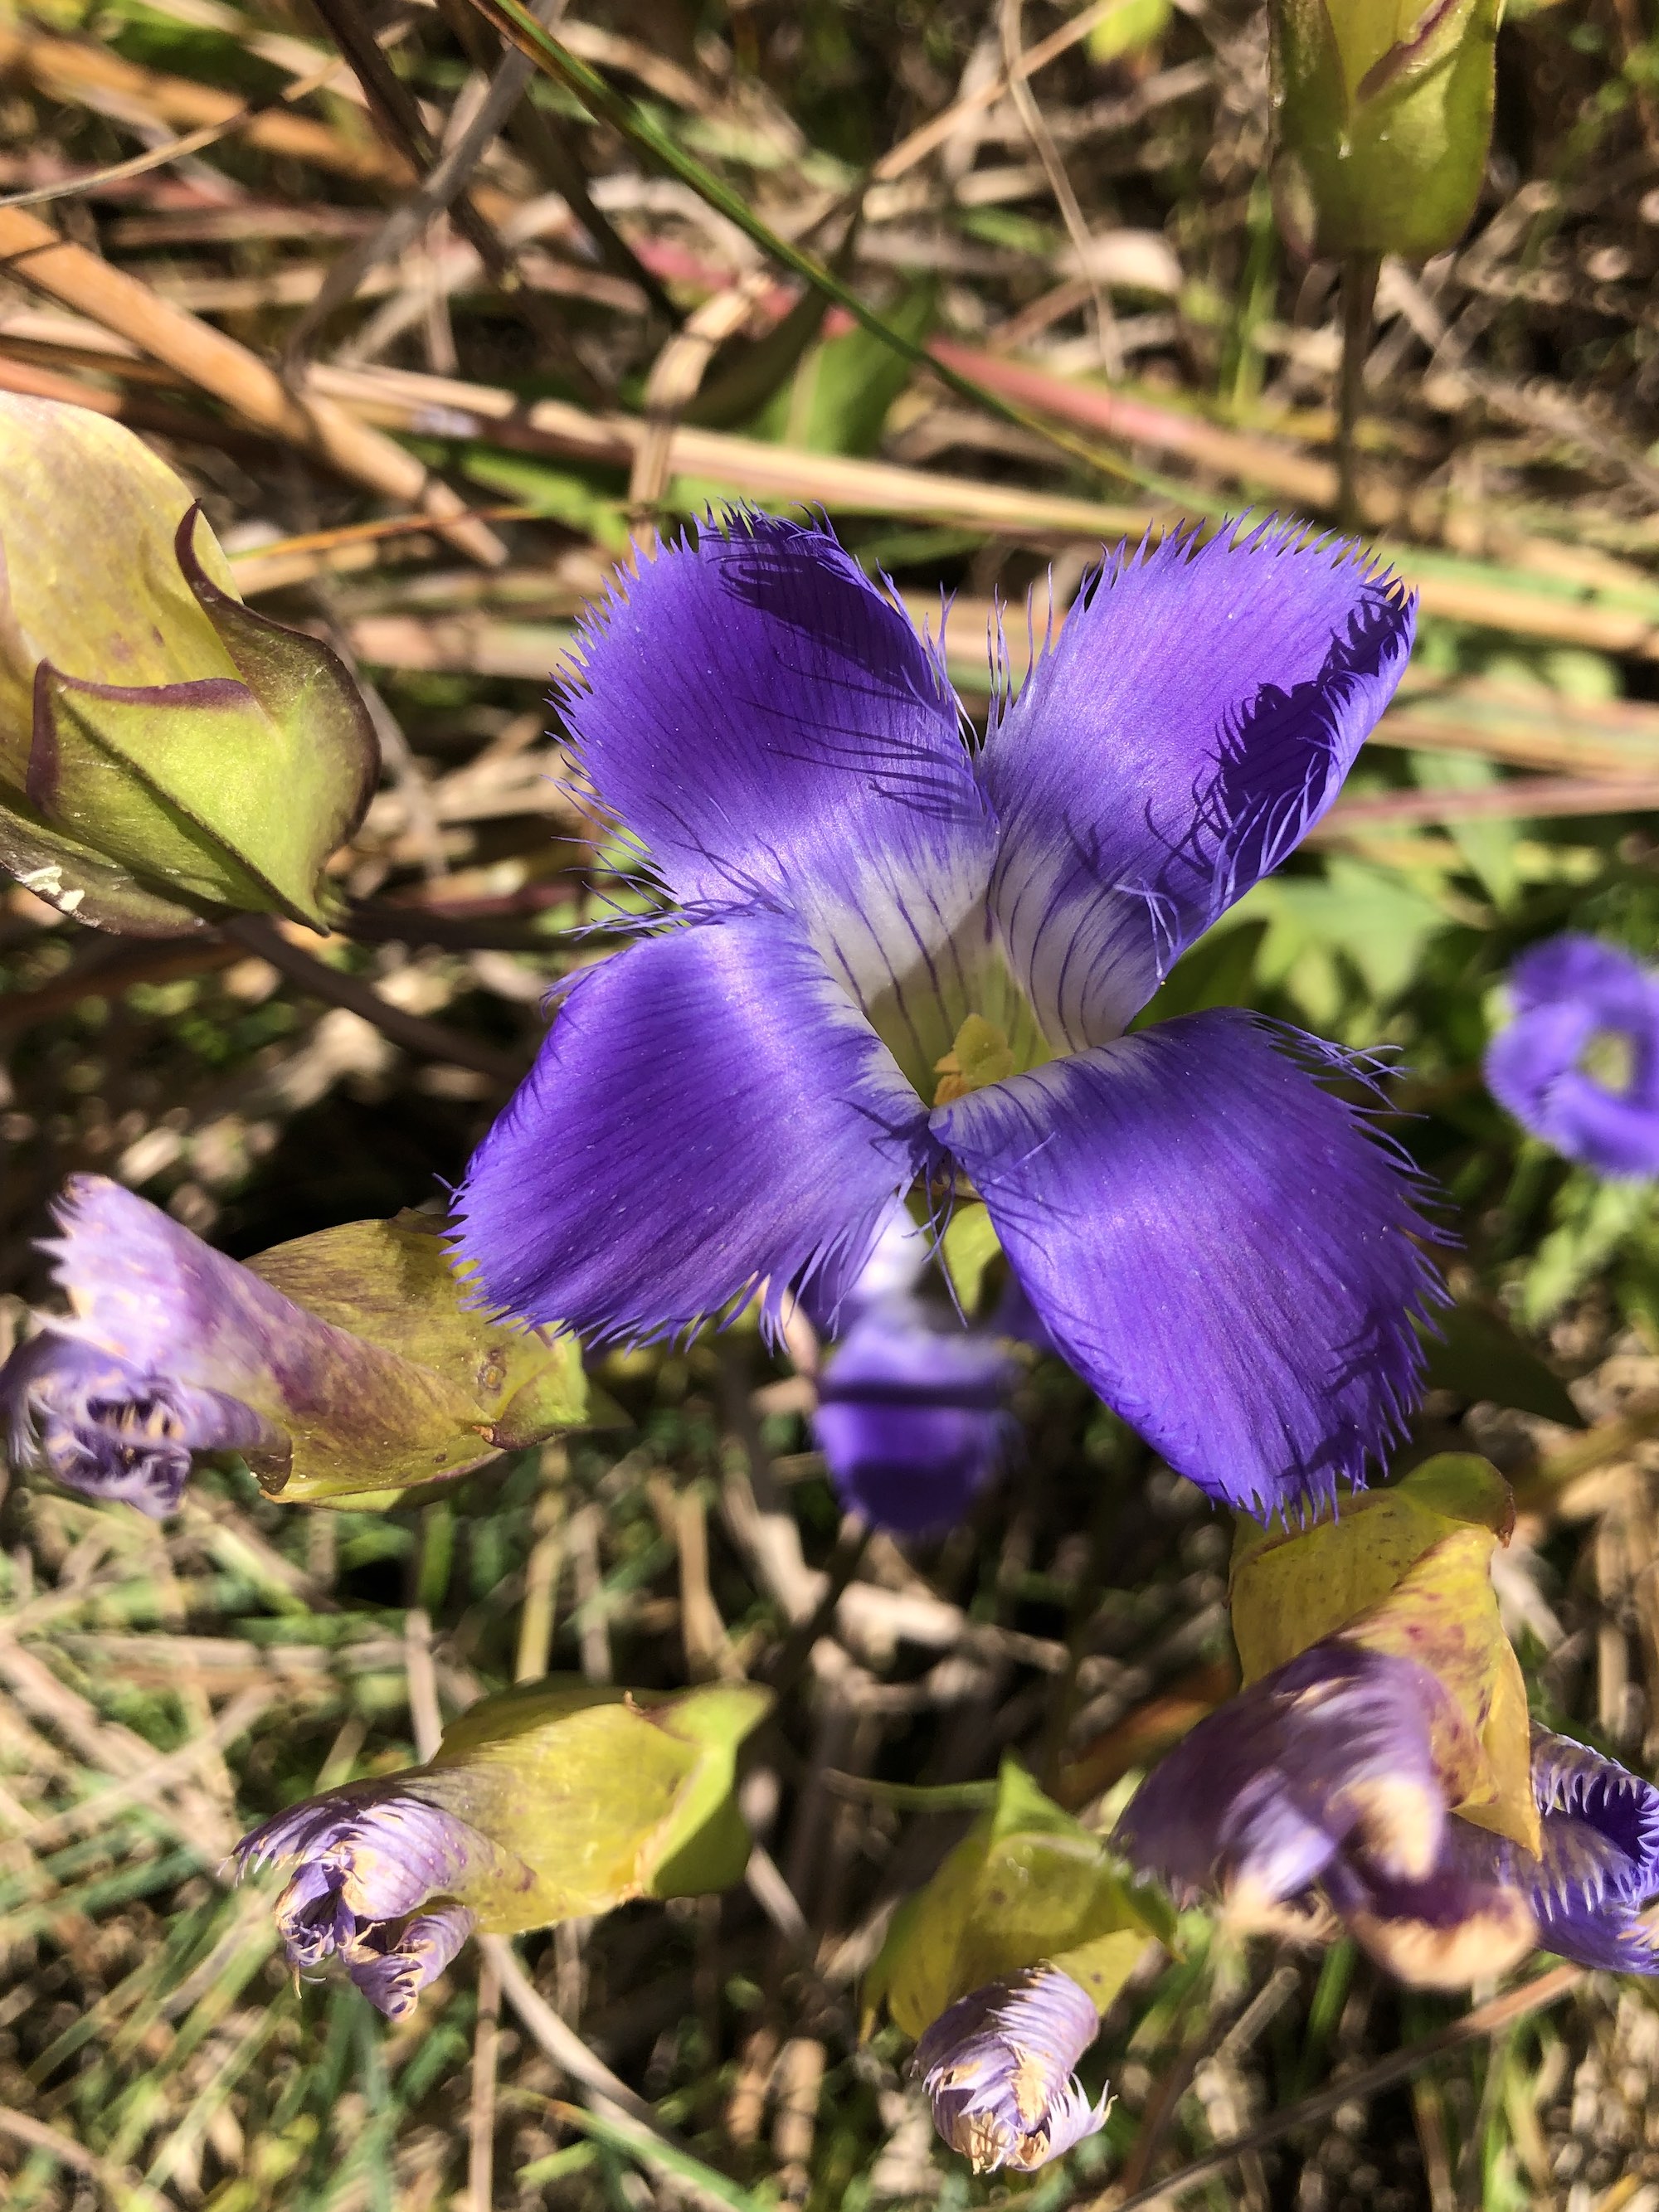 Fringed Gentian at the edge of the UW Arboretum's Curtis Prairie along a service road in Madison, Wisconsin on September 27, 2022.